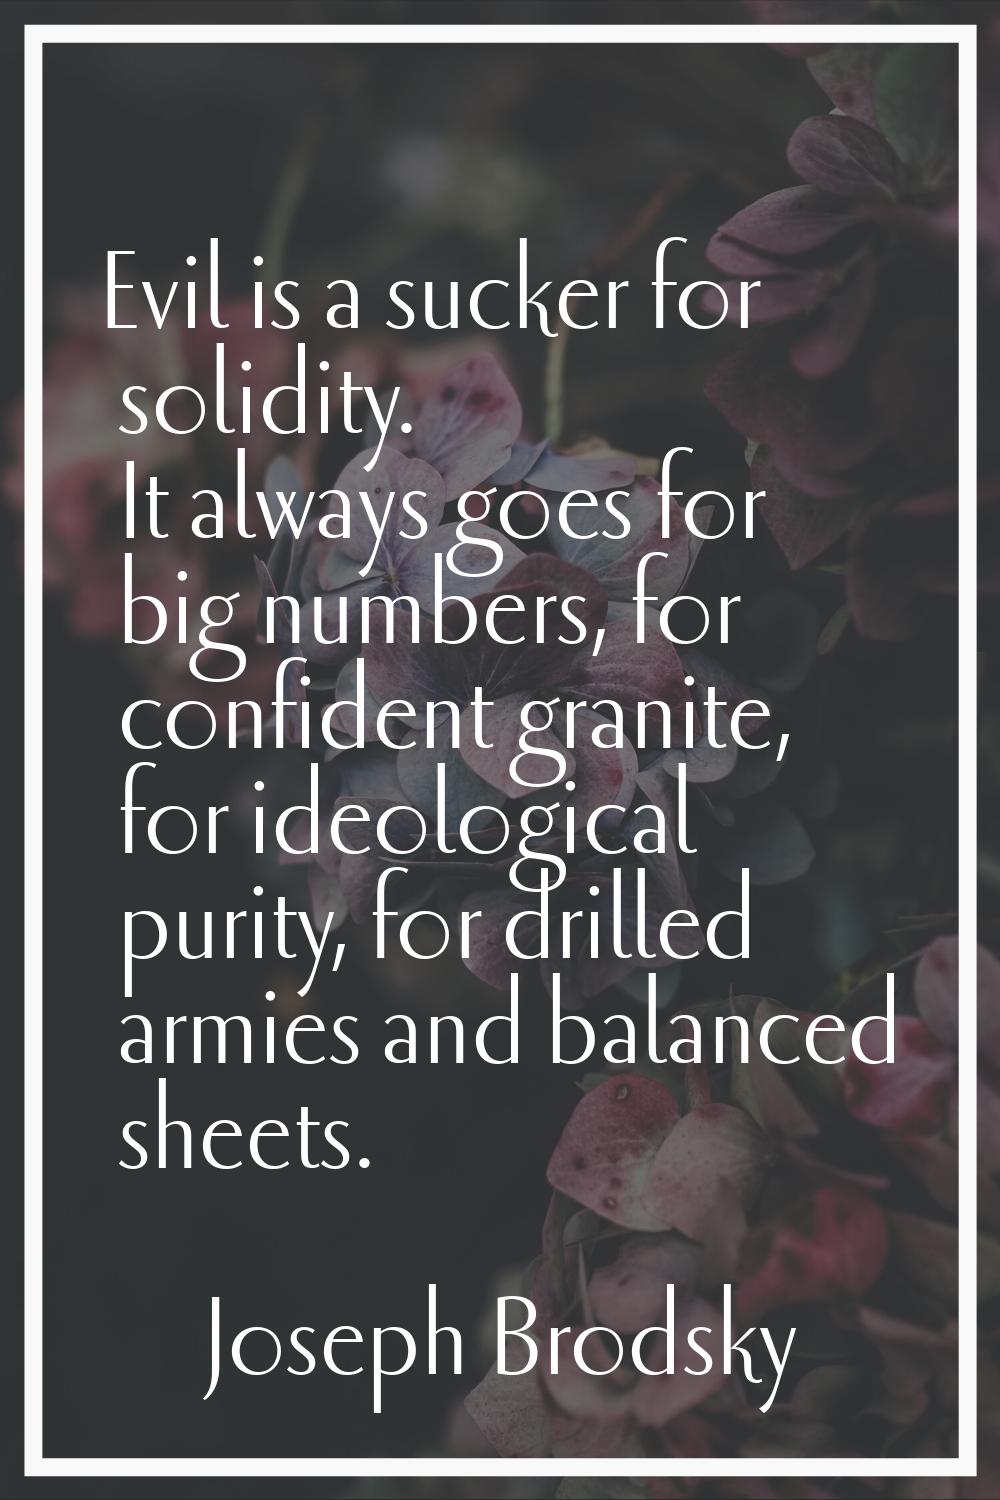 Evil is a sucker for solidity. It always goes for big numbers, for confident granite, for ideologic